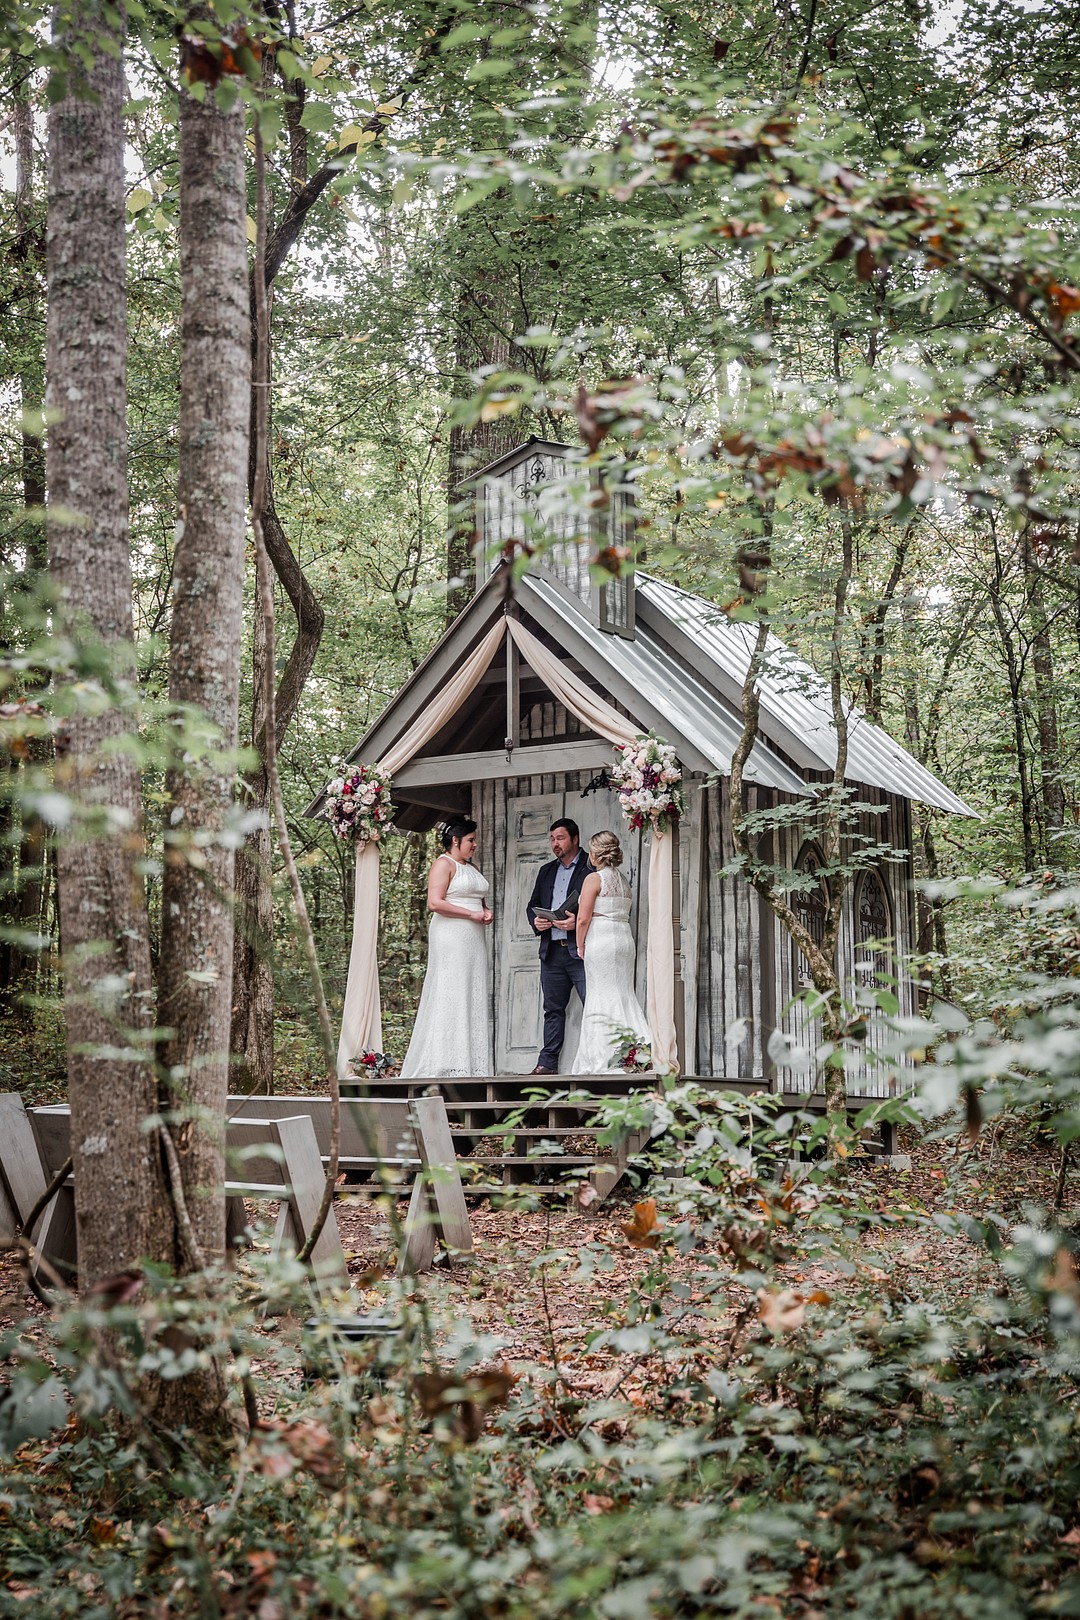 Woodland adventure elopement at Chapel in the Hollow LGBTQ+ weddings two brides waterfall mountains forest woods Tennessee hiking trails vows